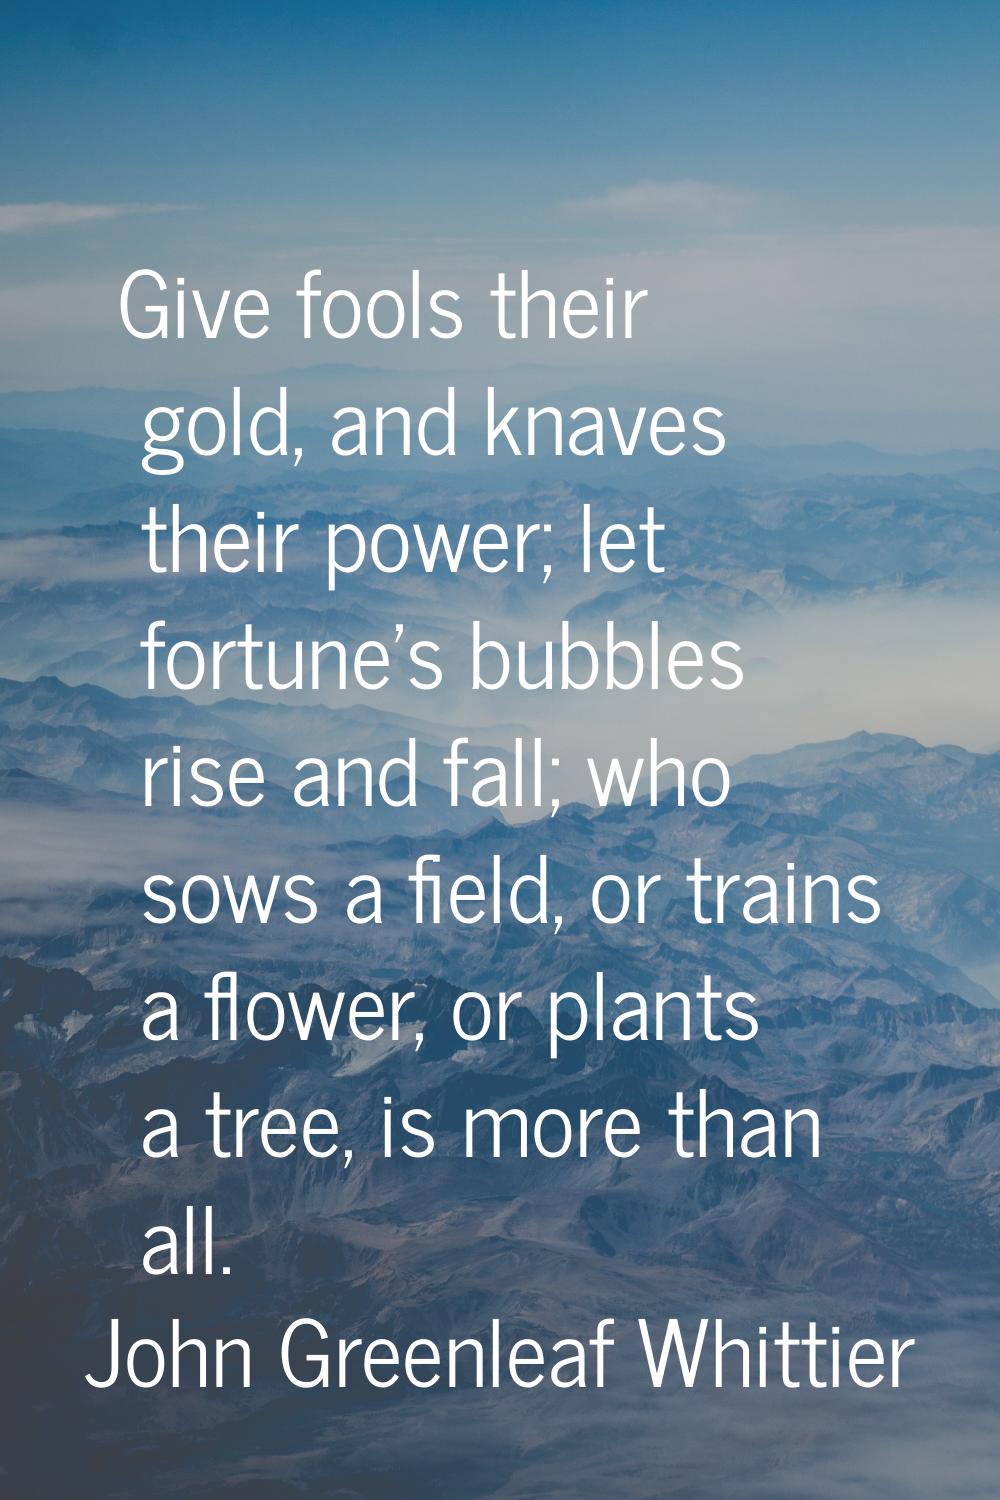 Give fools their gold, and knaves their power; let fortune's bubbles rise and fall; who sows a fiel